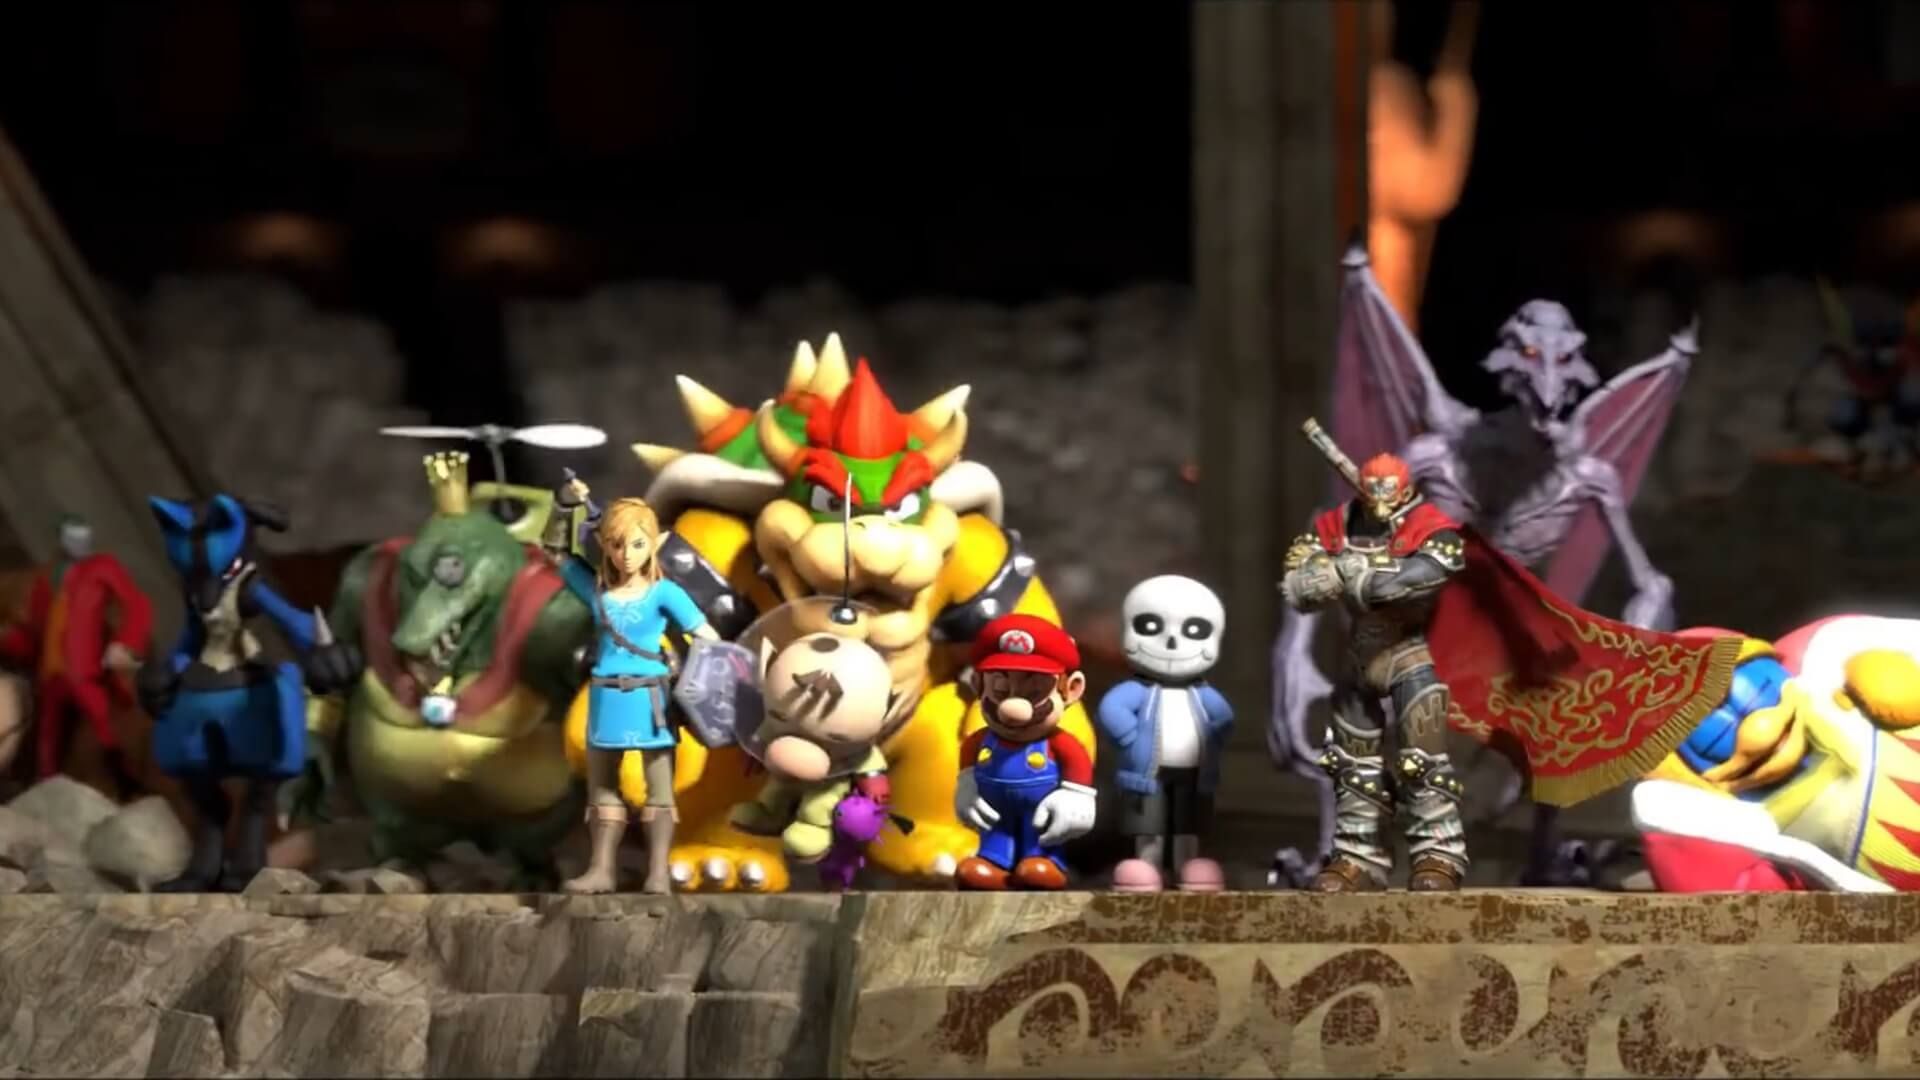 Epic Super Smash Bros. Ultimate music video created by fans